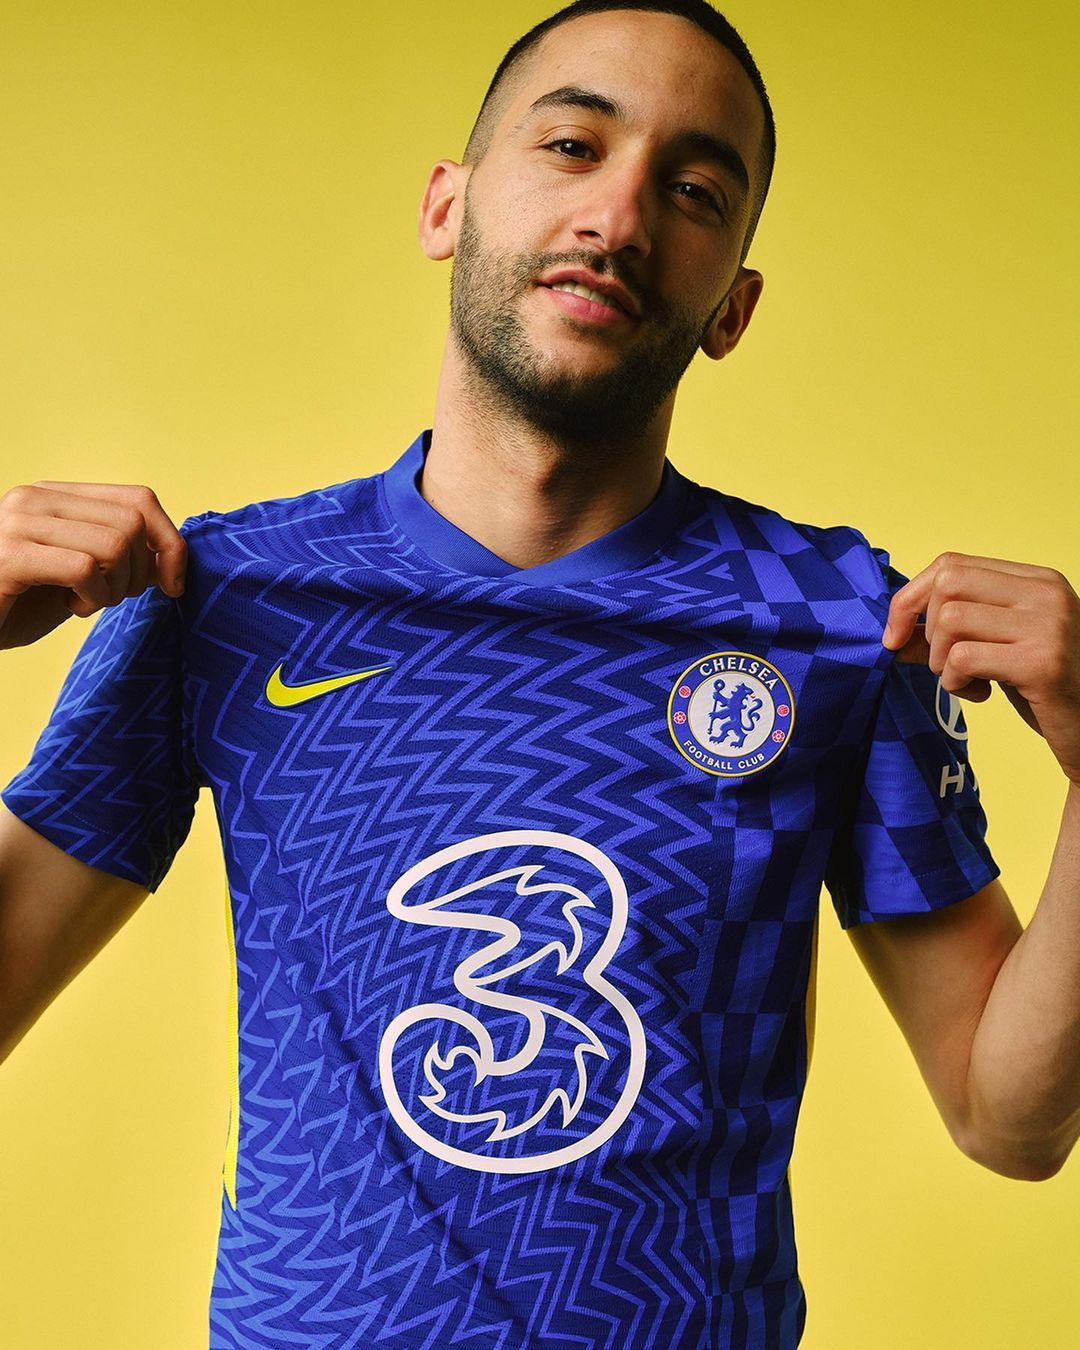 Chelsea fans have not responded favourably to their 2021-22 home kit - which costs £105